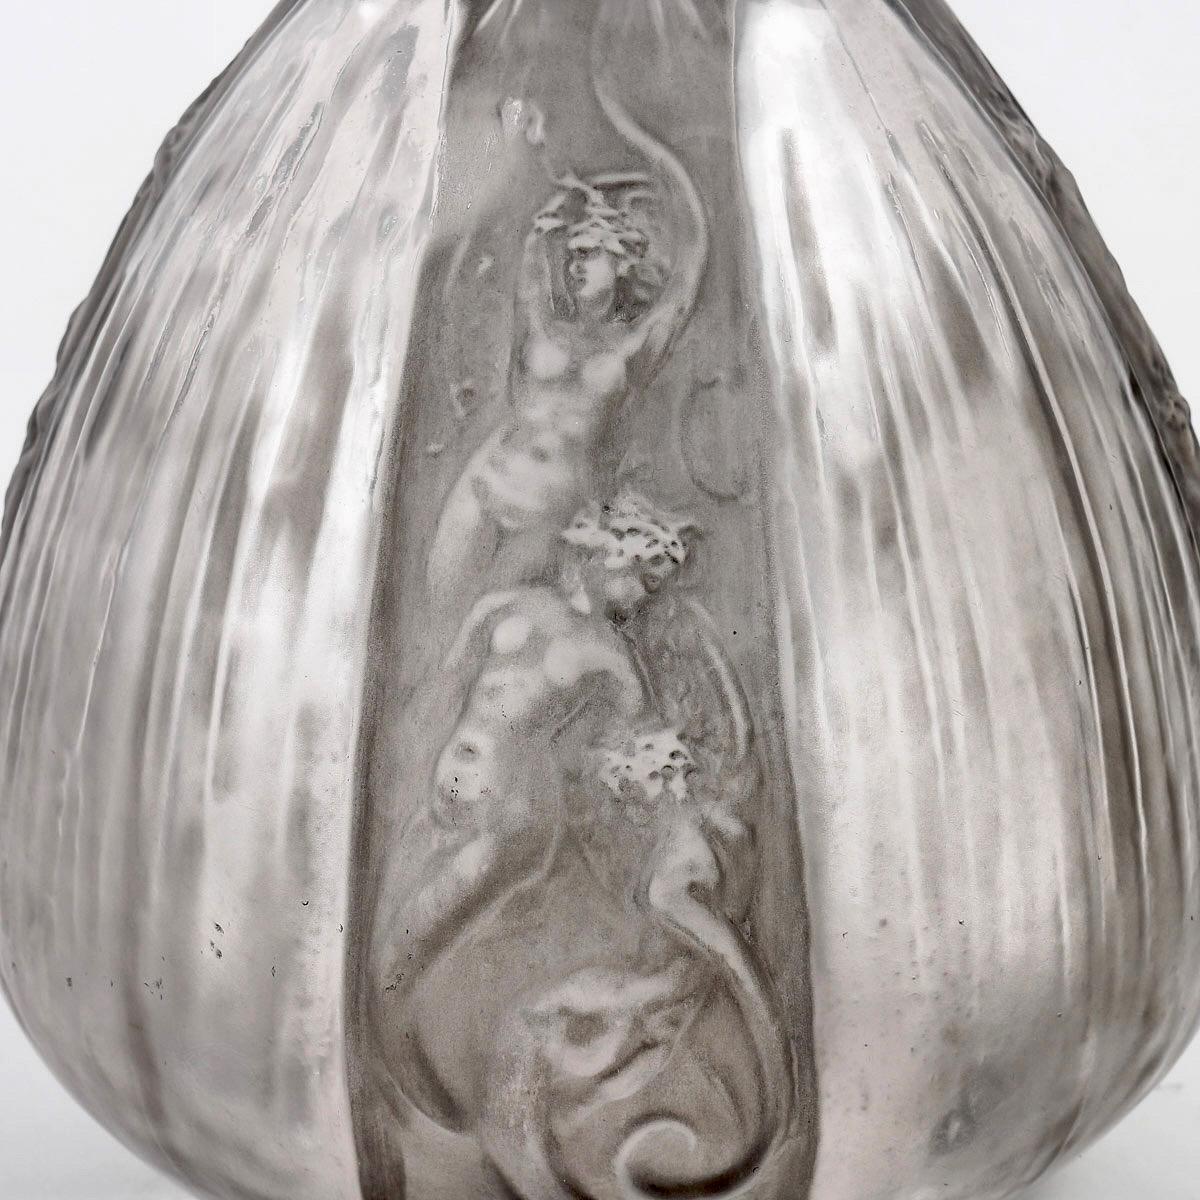 Early 20th Century 1911 René Lalique - Decanter Sirenes & Grenouilles Glass Mermaids & Frogs